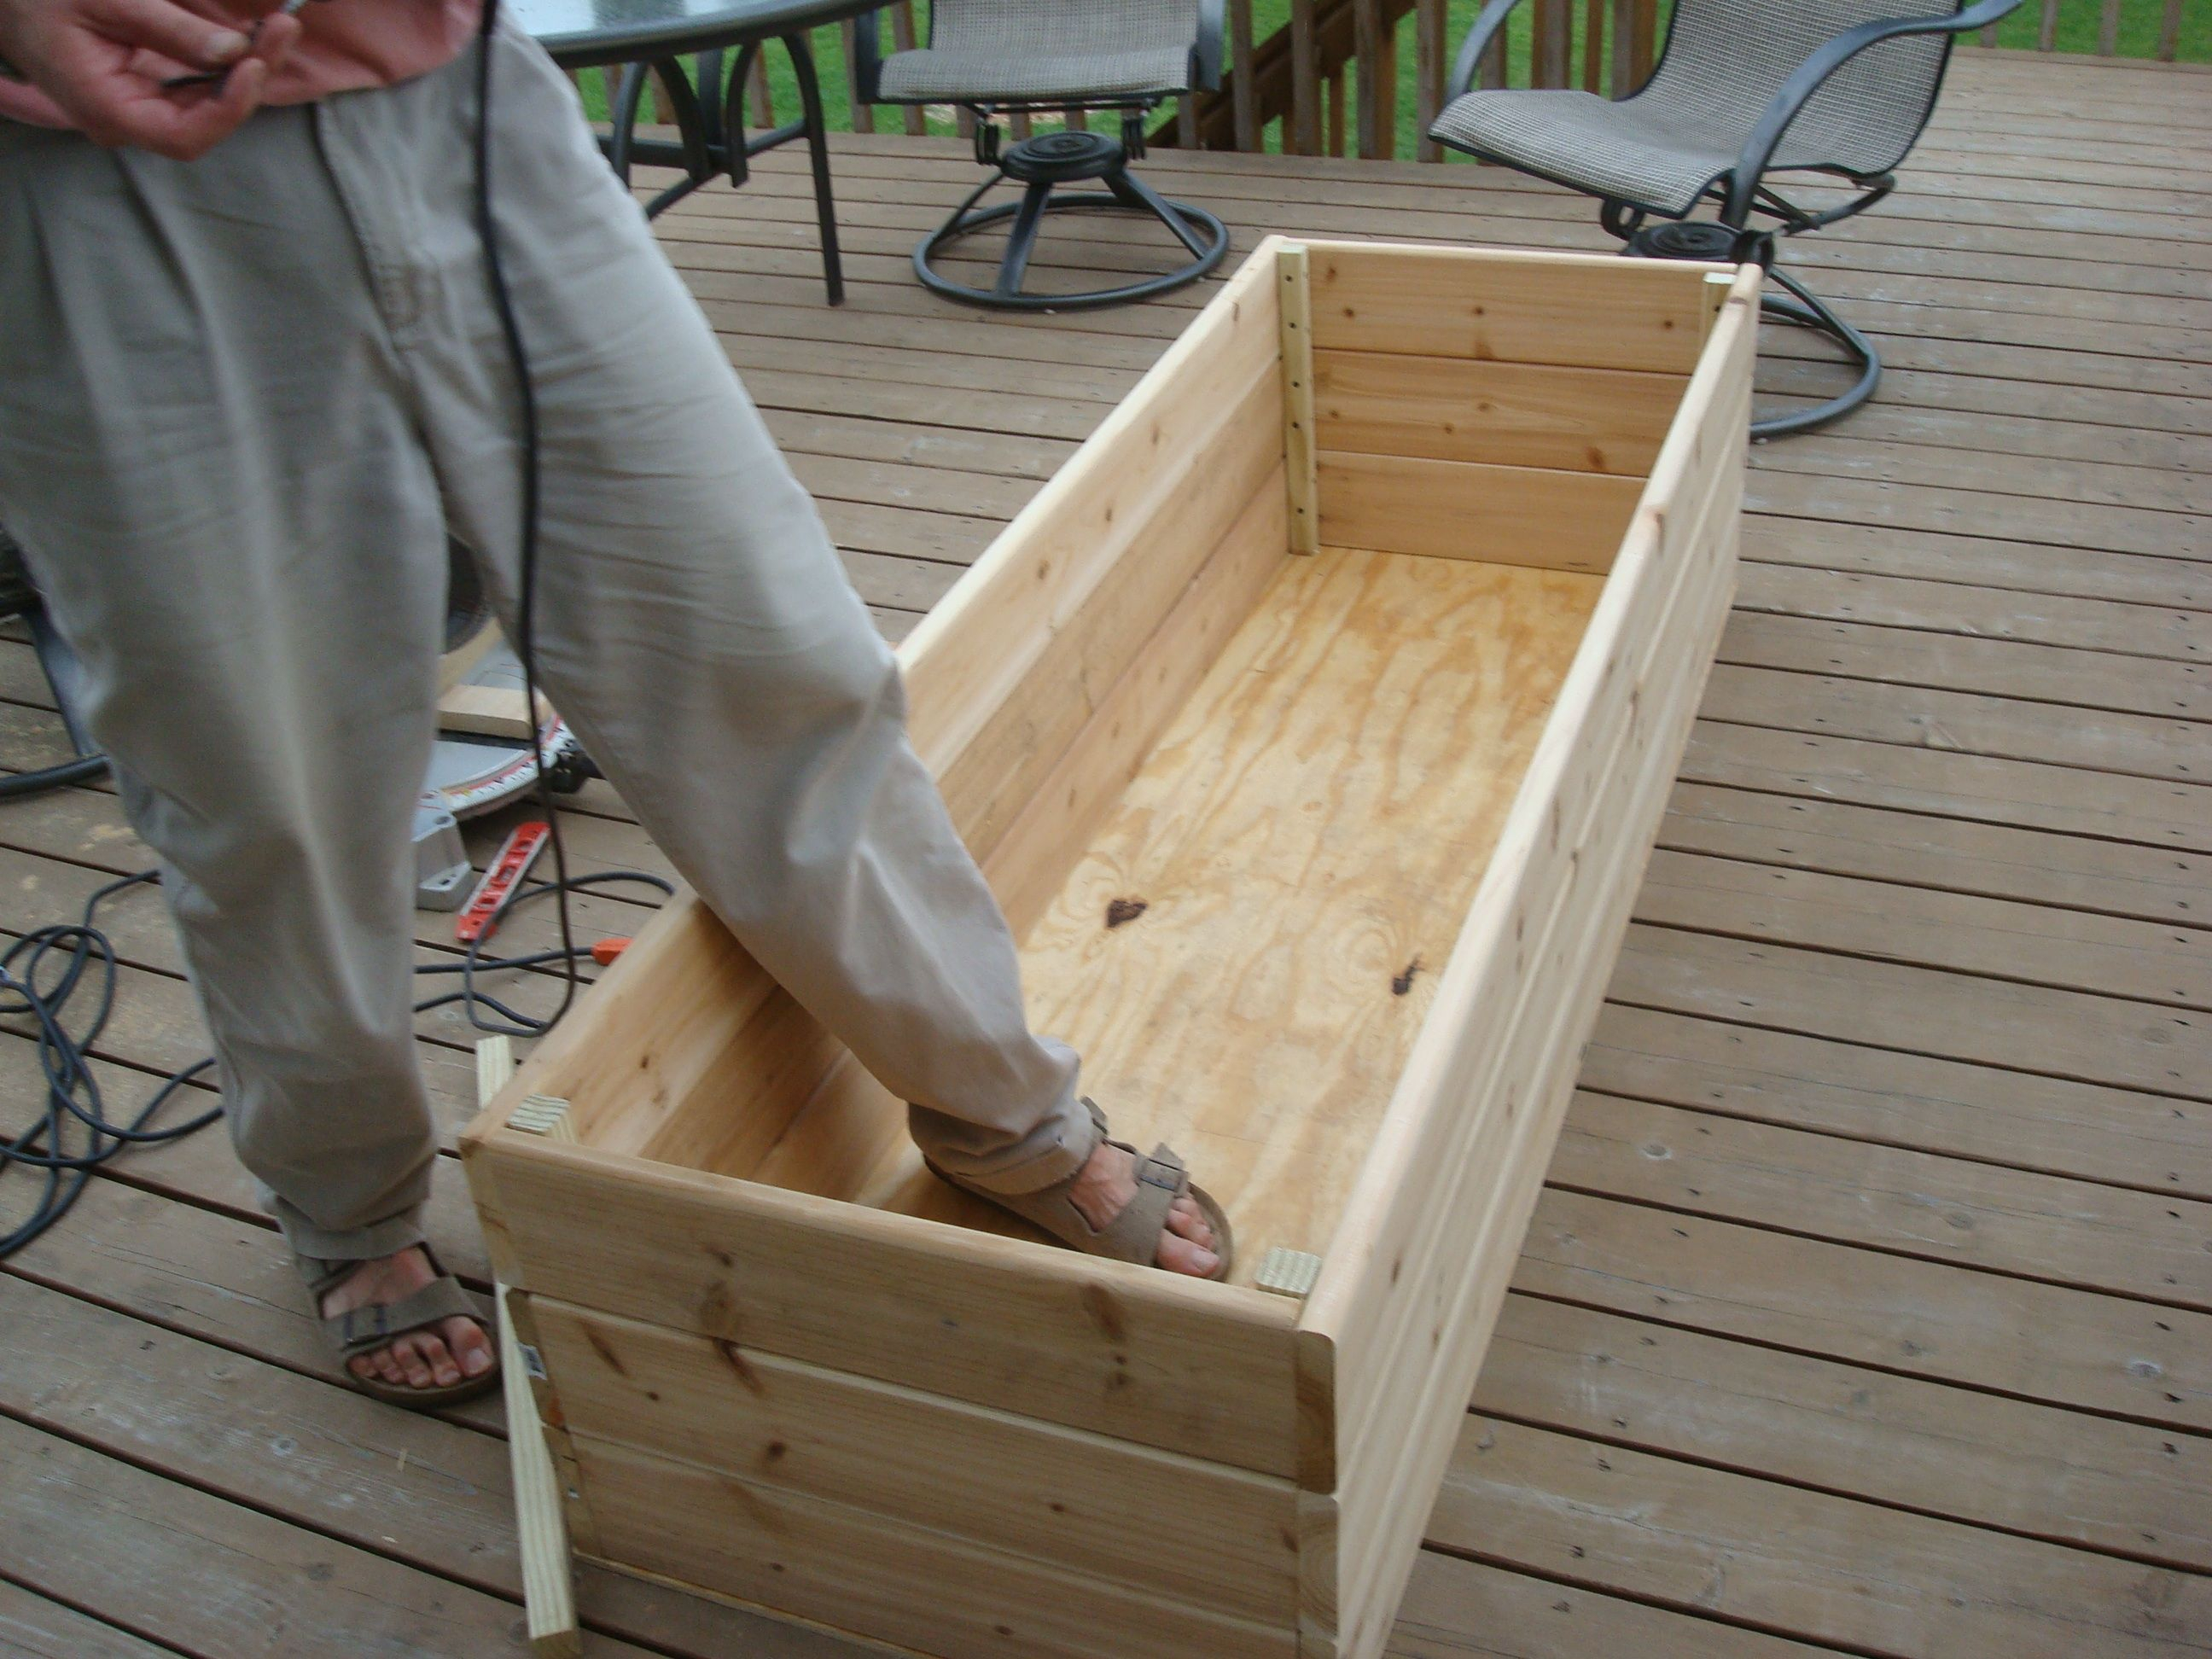 Diy Deck Planter Box Plans Wooden Pdf Adirondack Chair Plans intended for dimensions 2592 X 1944